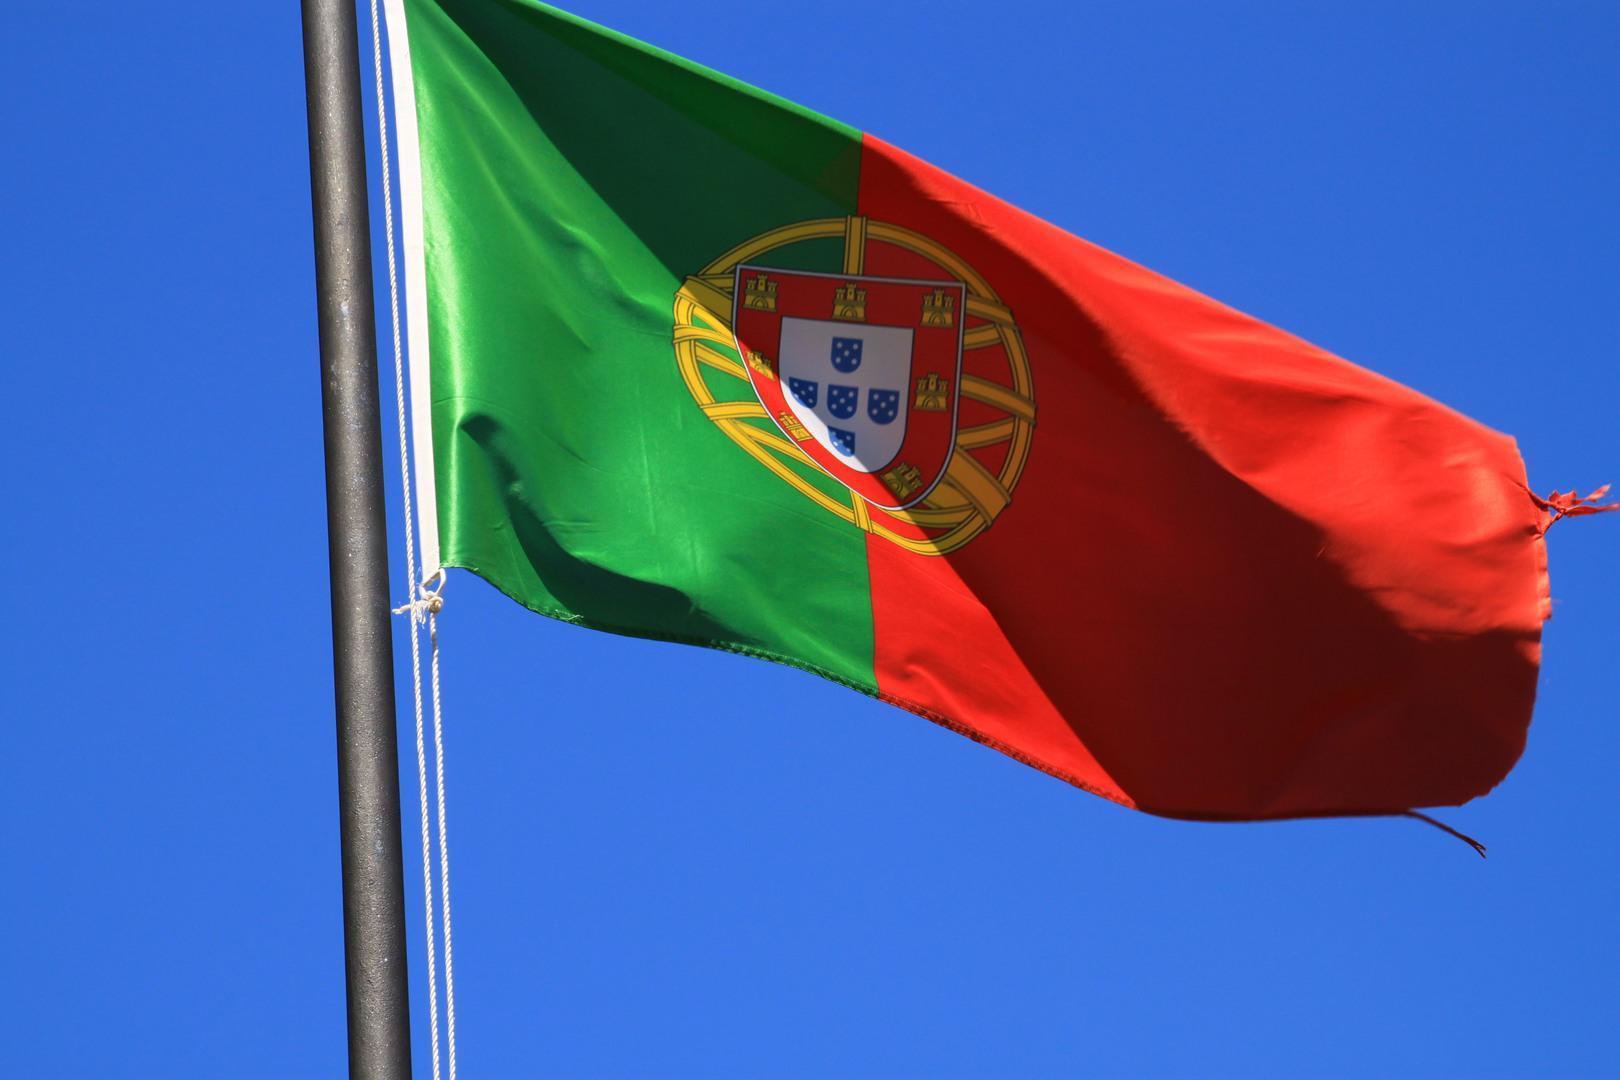 Portugal Flag Live Wallpaper for Android - APK Download